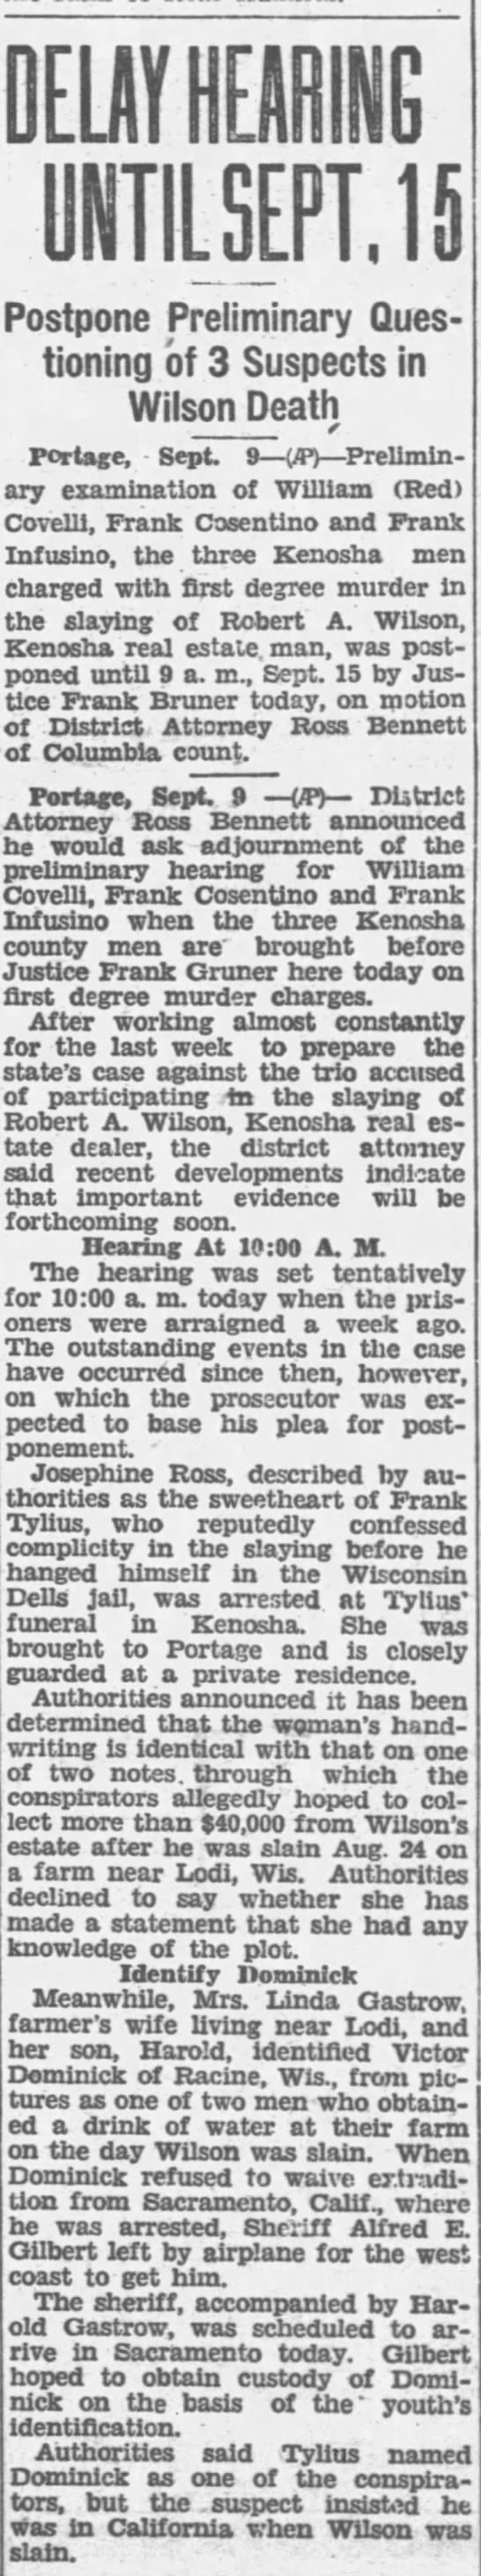 Frank Cosentino  and two others Sep 9 1932 Marshfield News - 